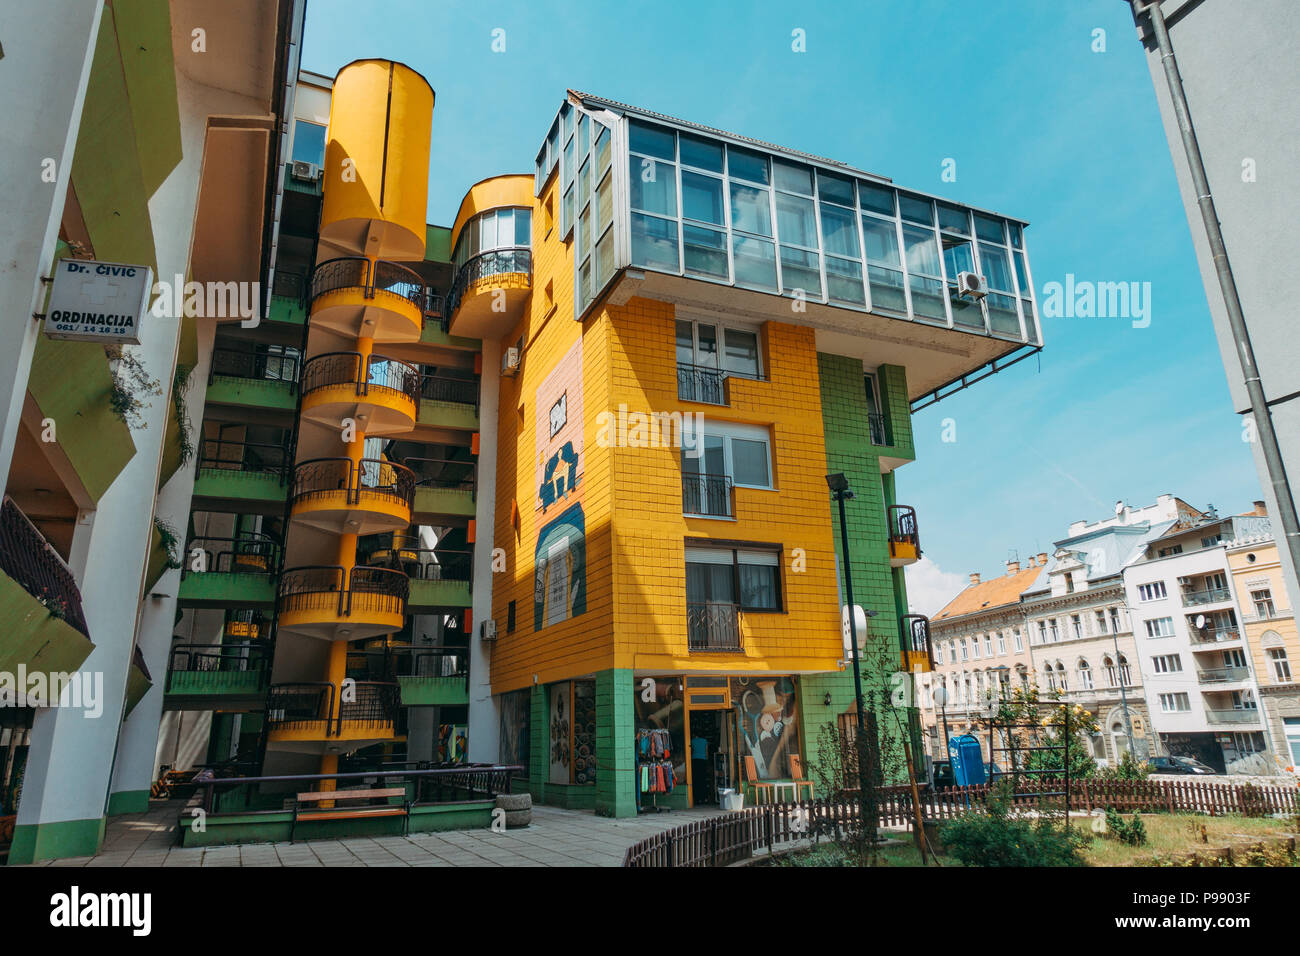 The Papagajka (Parrot) building in Sarajevo, with shades of the brutalist architecture of socialist Yugoslavia, now painted bright yellow and green. Stock Photo